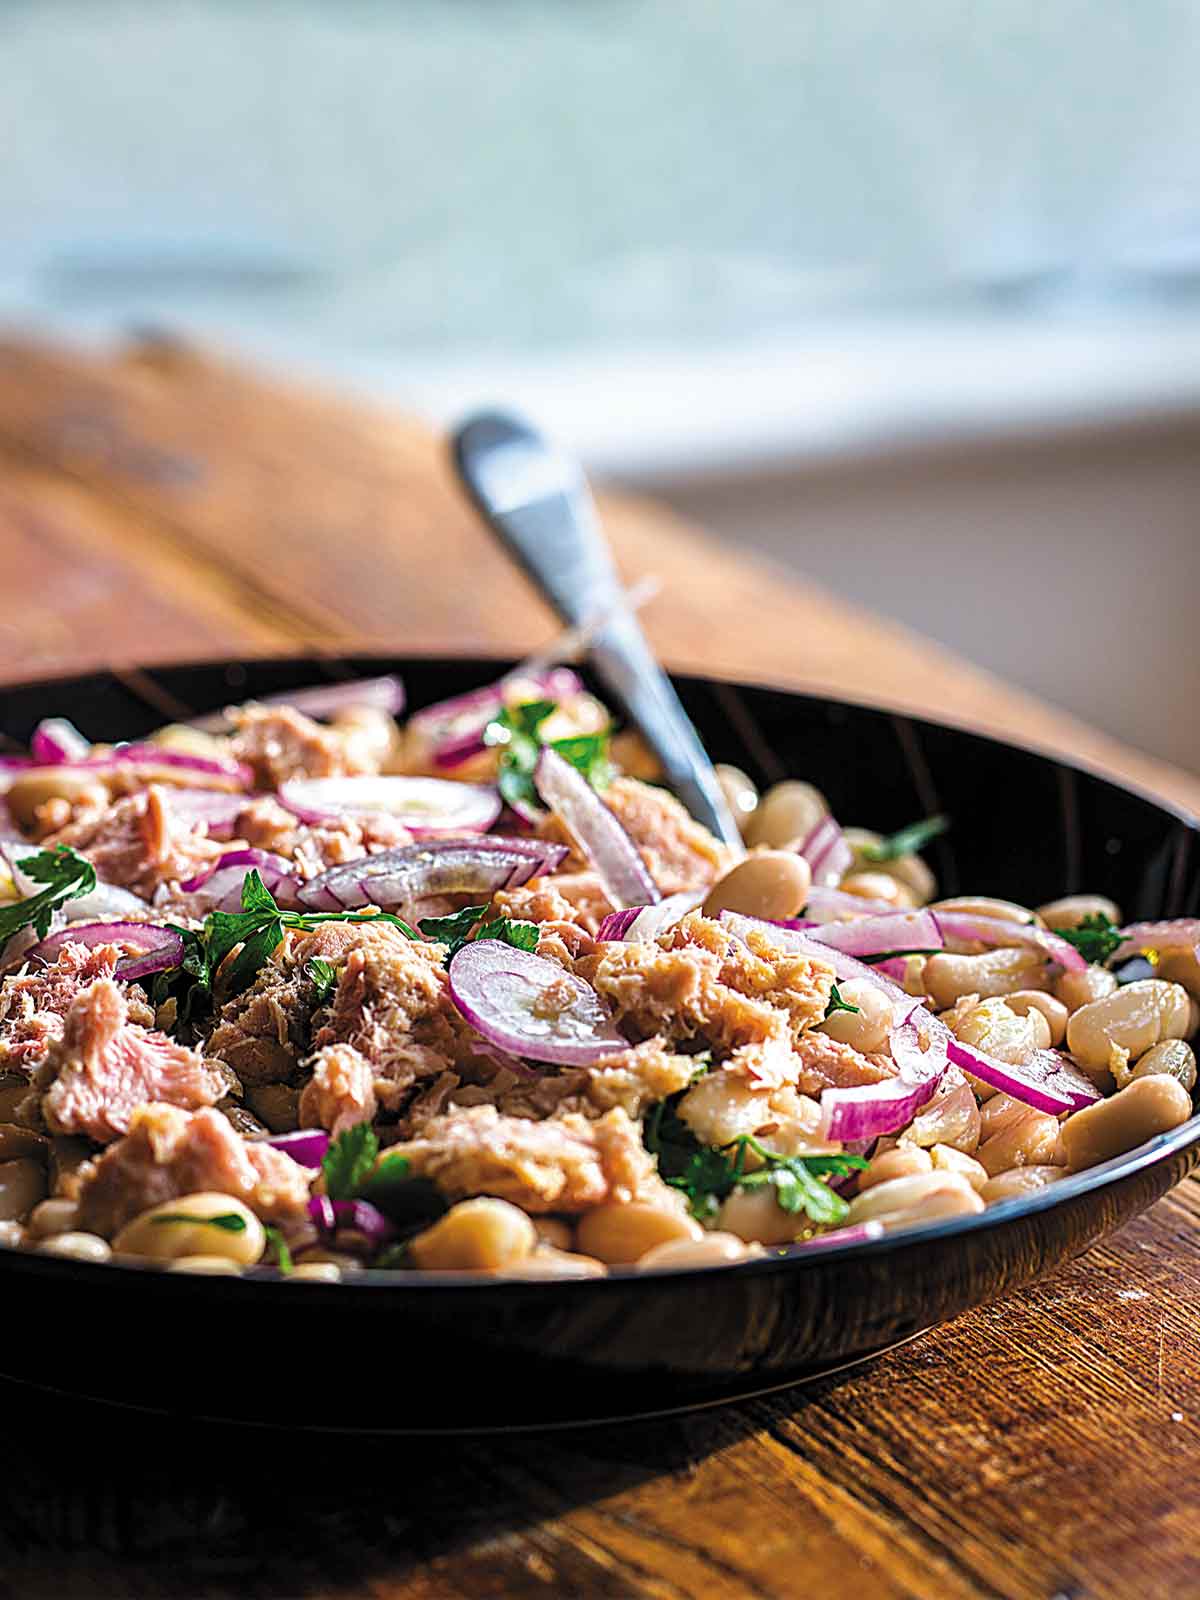 Tuna salad with white beans, red onion, and parsley in a black bowl with a fork, on a wooden table.